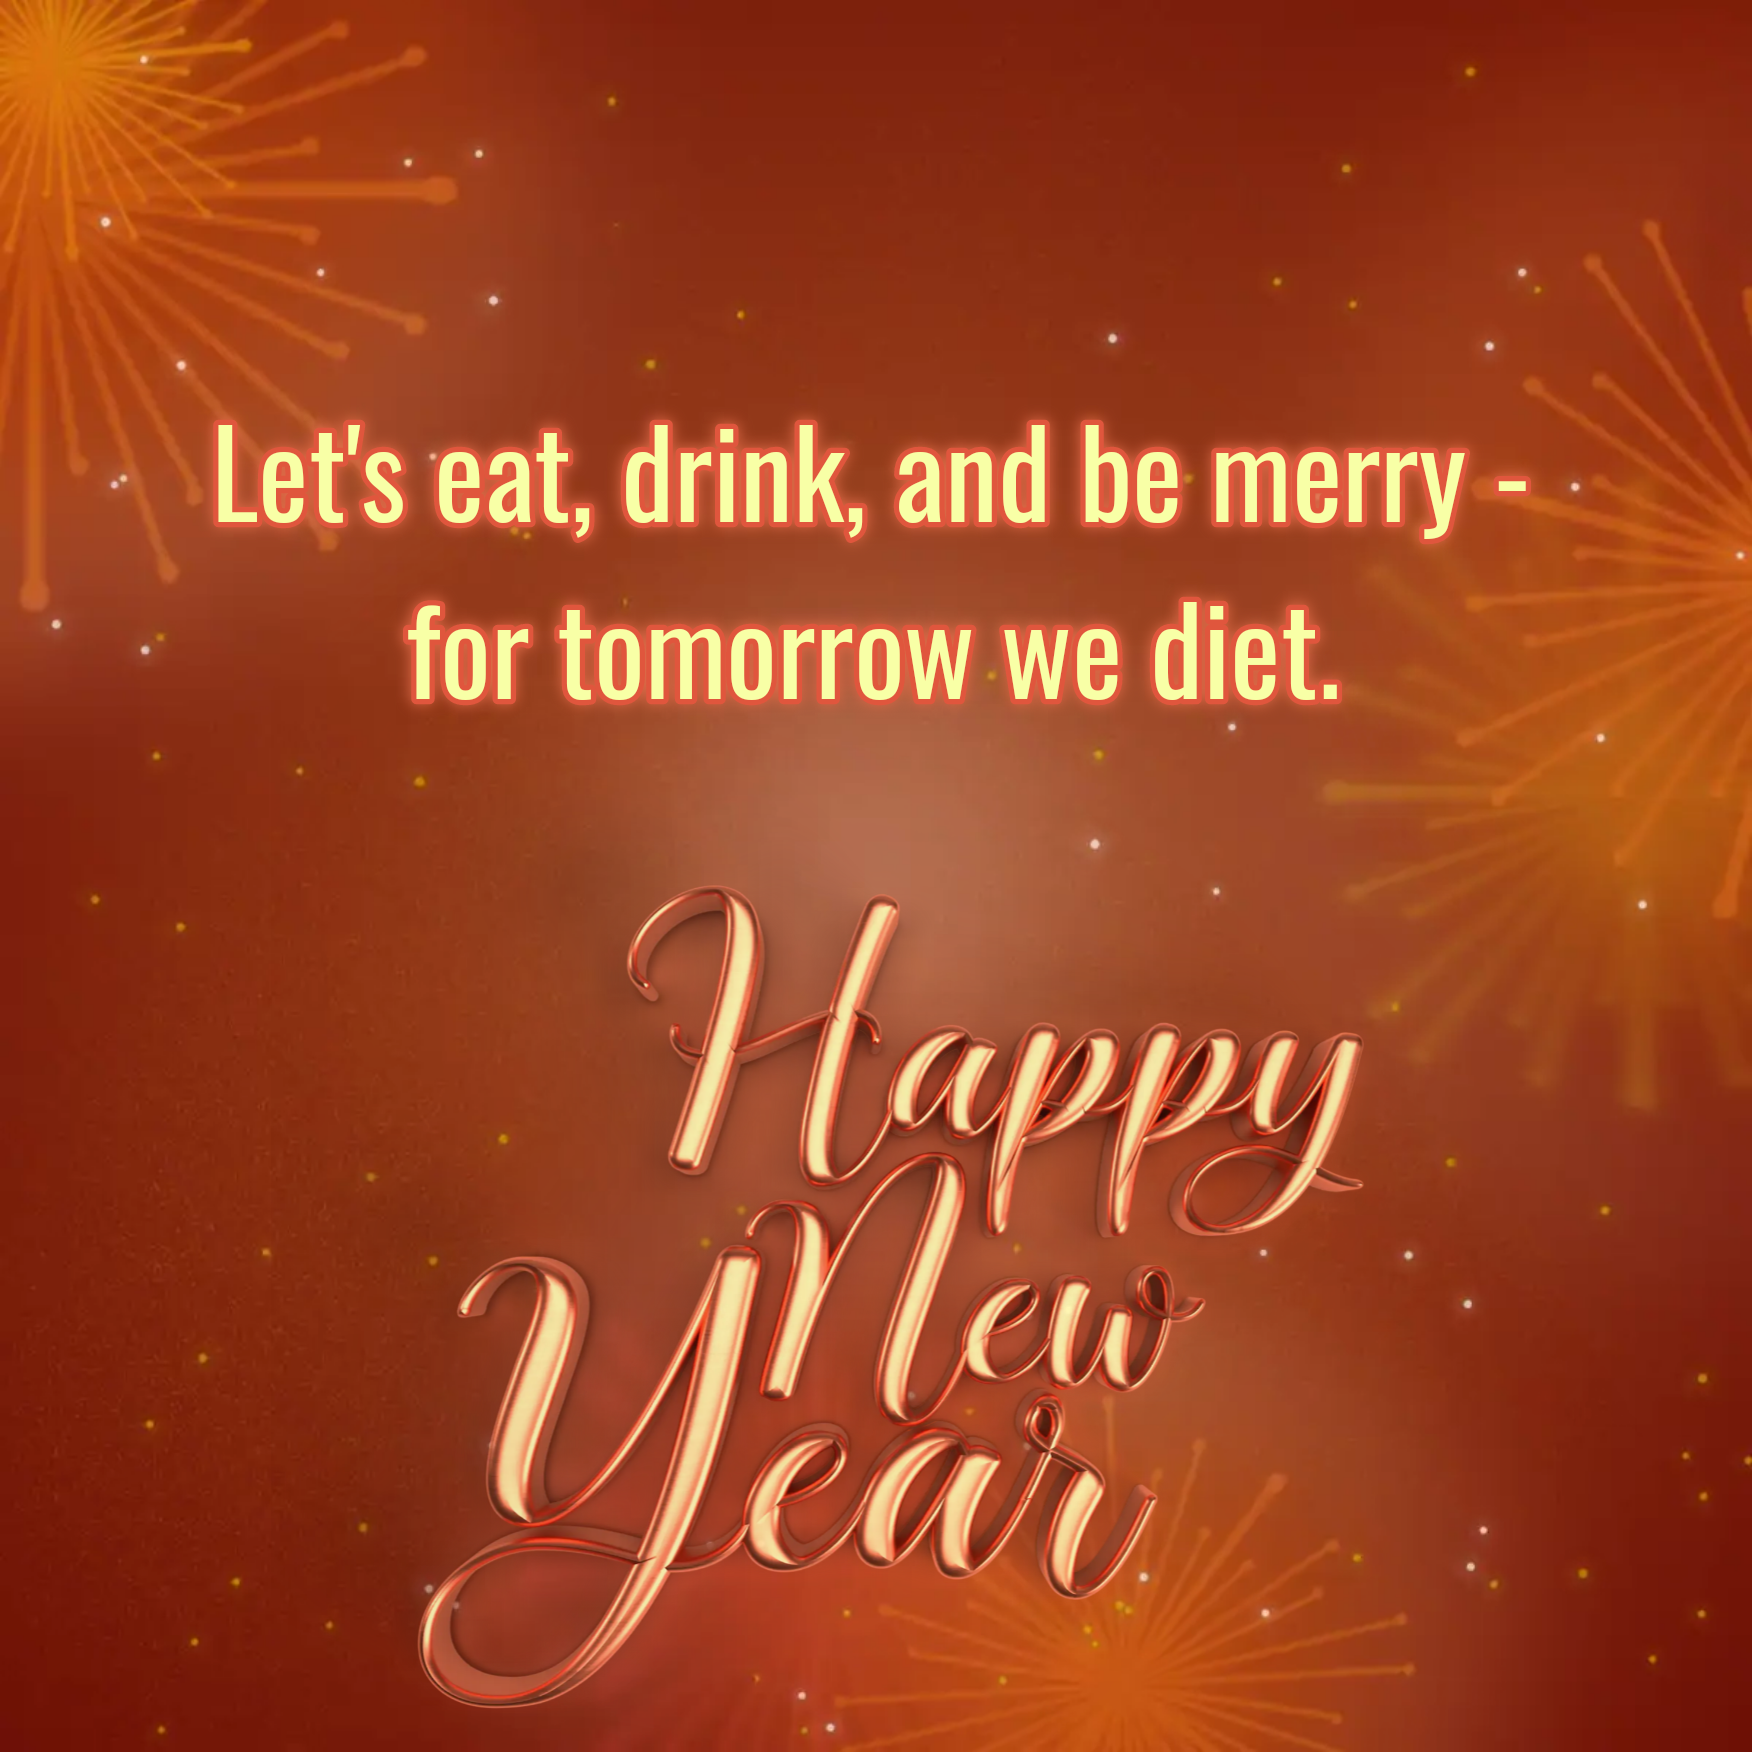 Let's eat drink and be merry - for tomorrow we diet